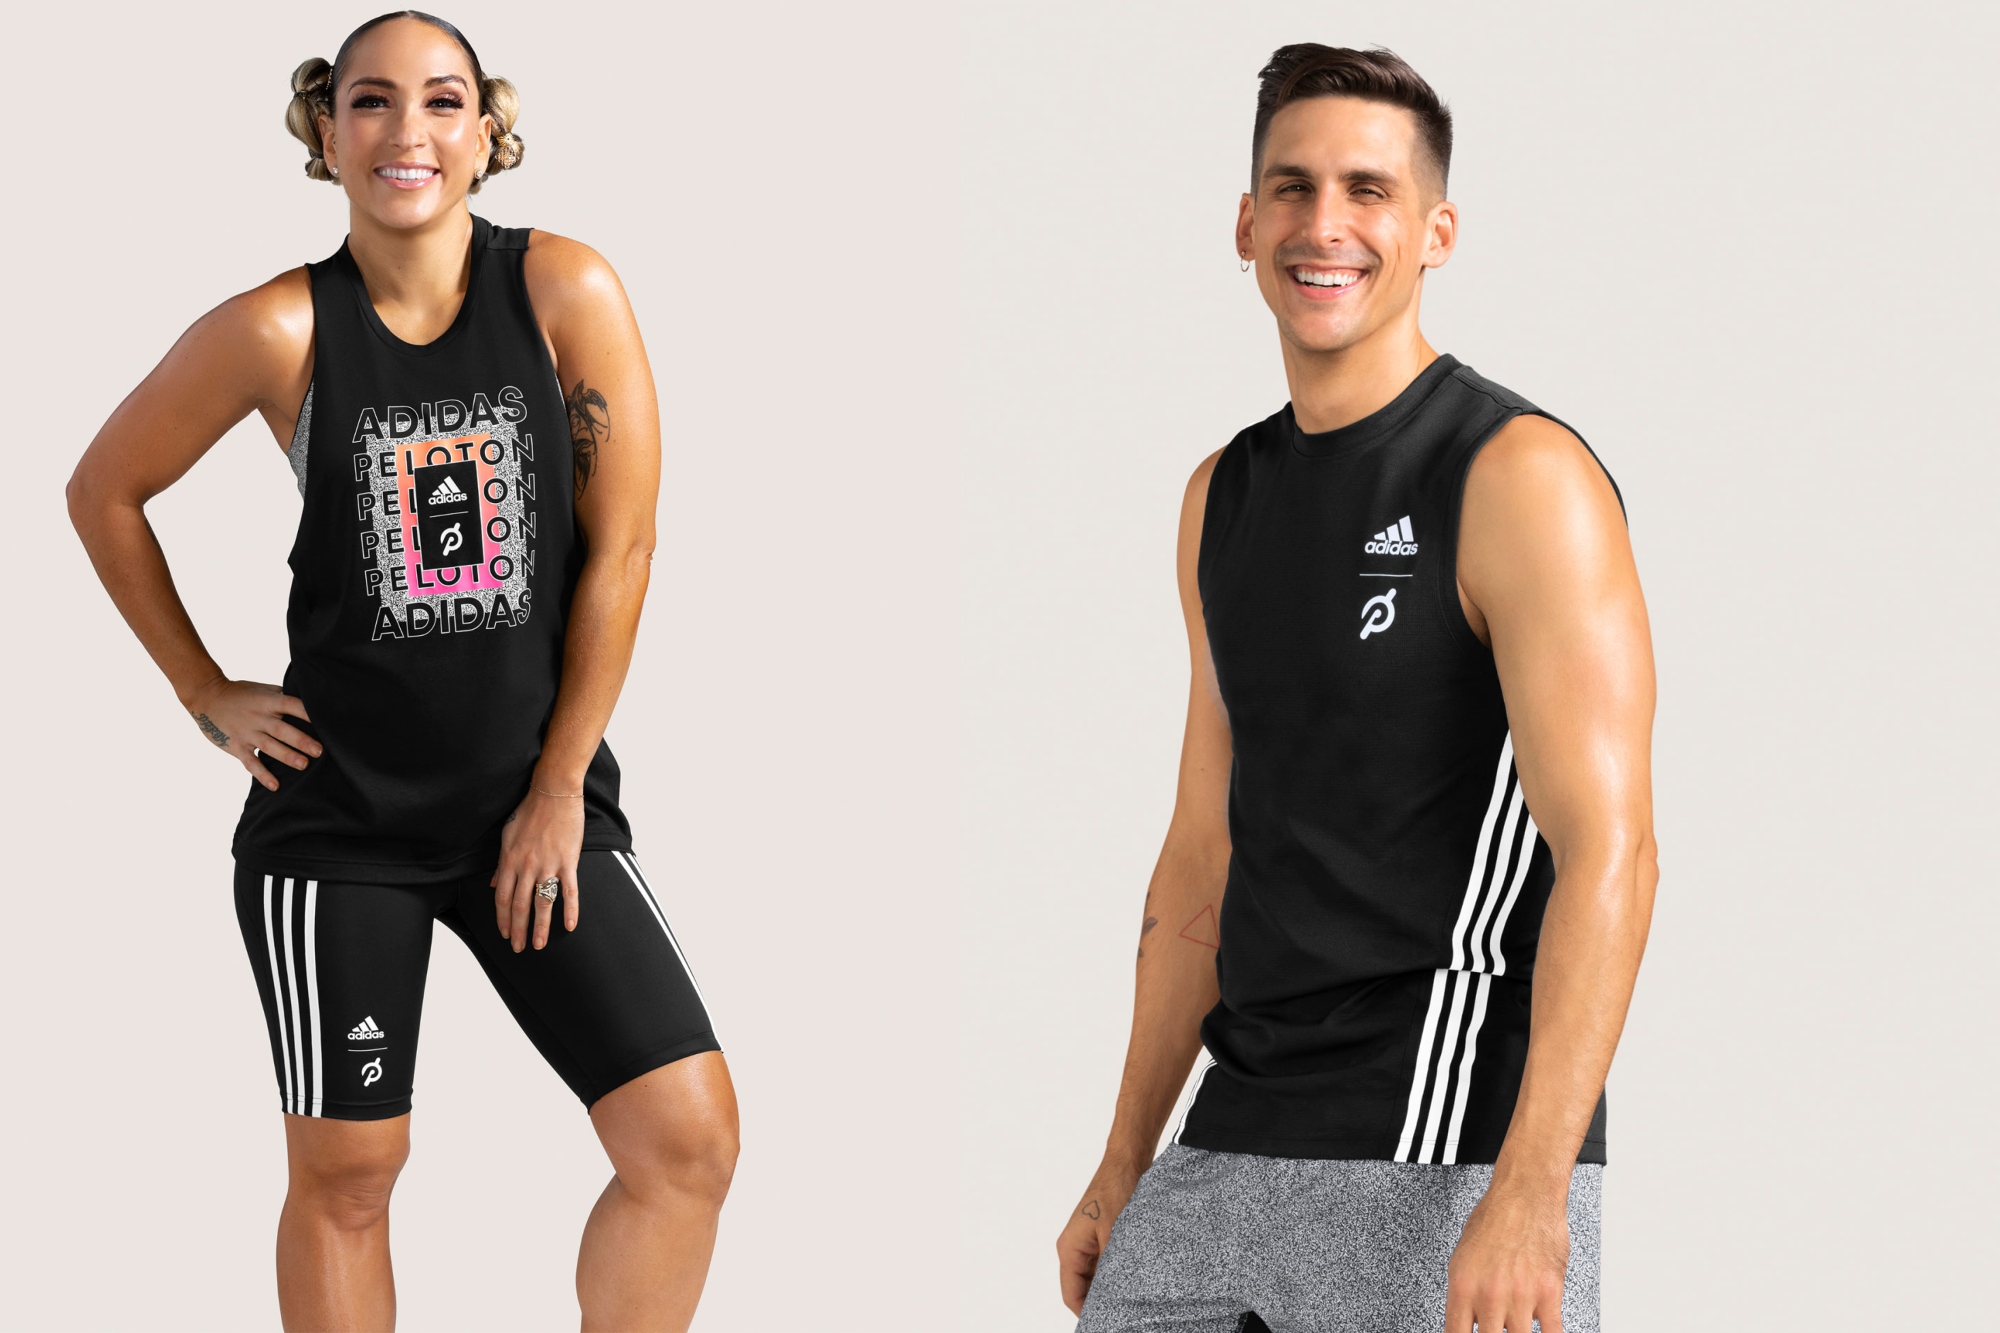 Adidas X Peloton full clothing collection revealed